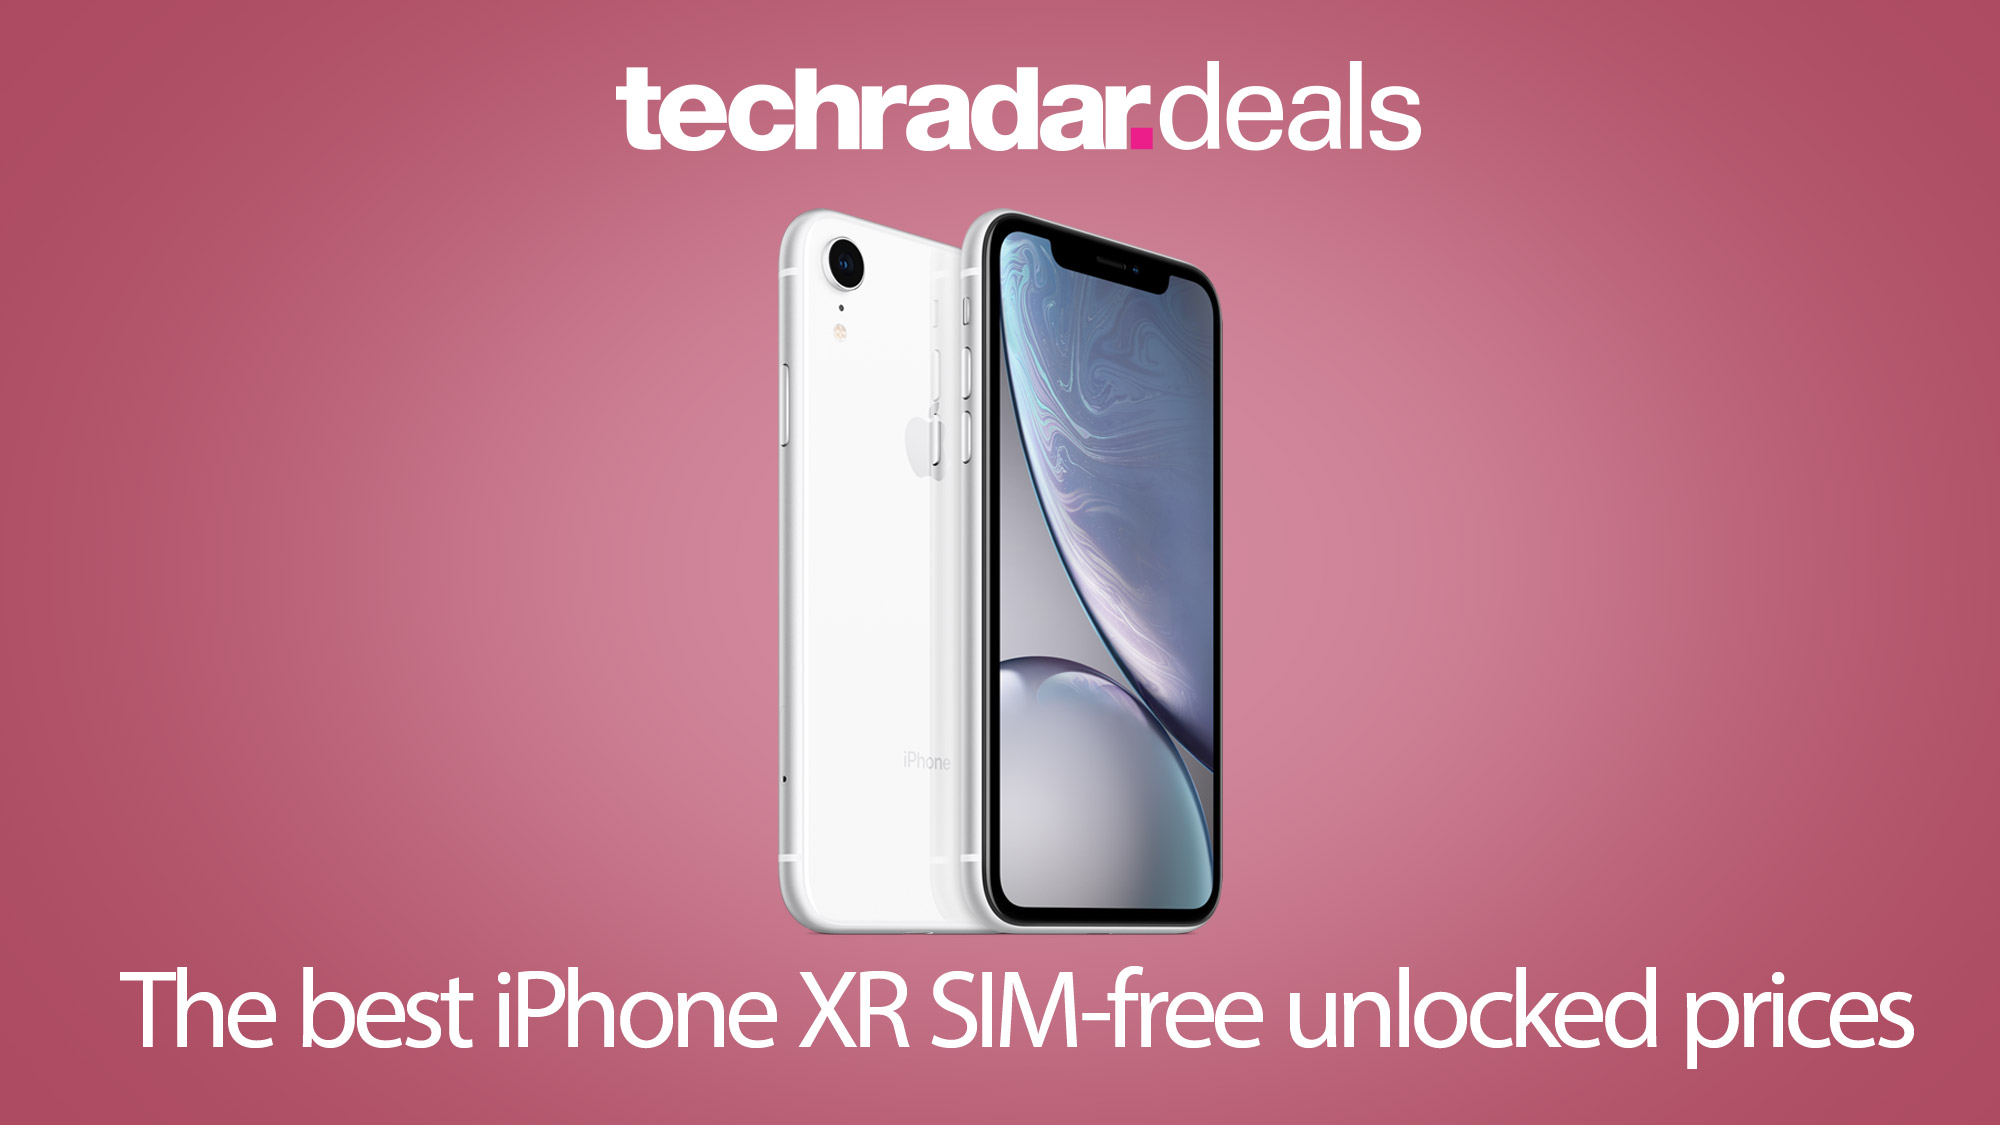 The cheapest unlocked iPhone XR SIM-free prices in December 2021